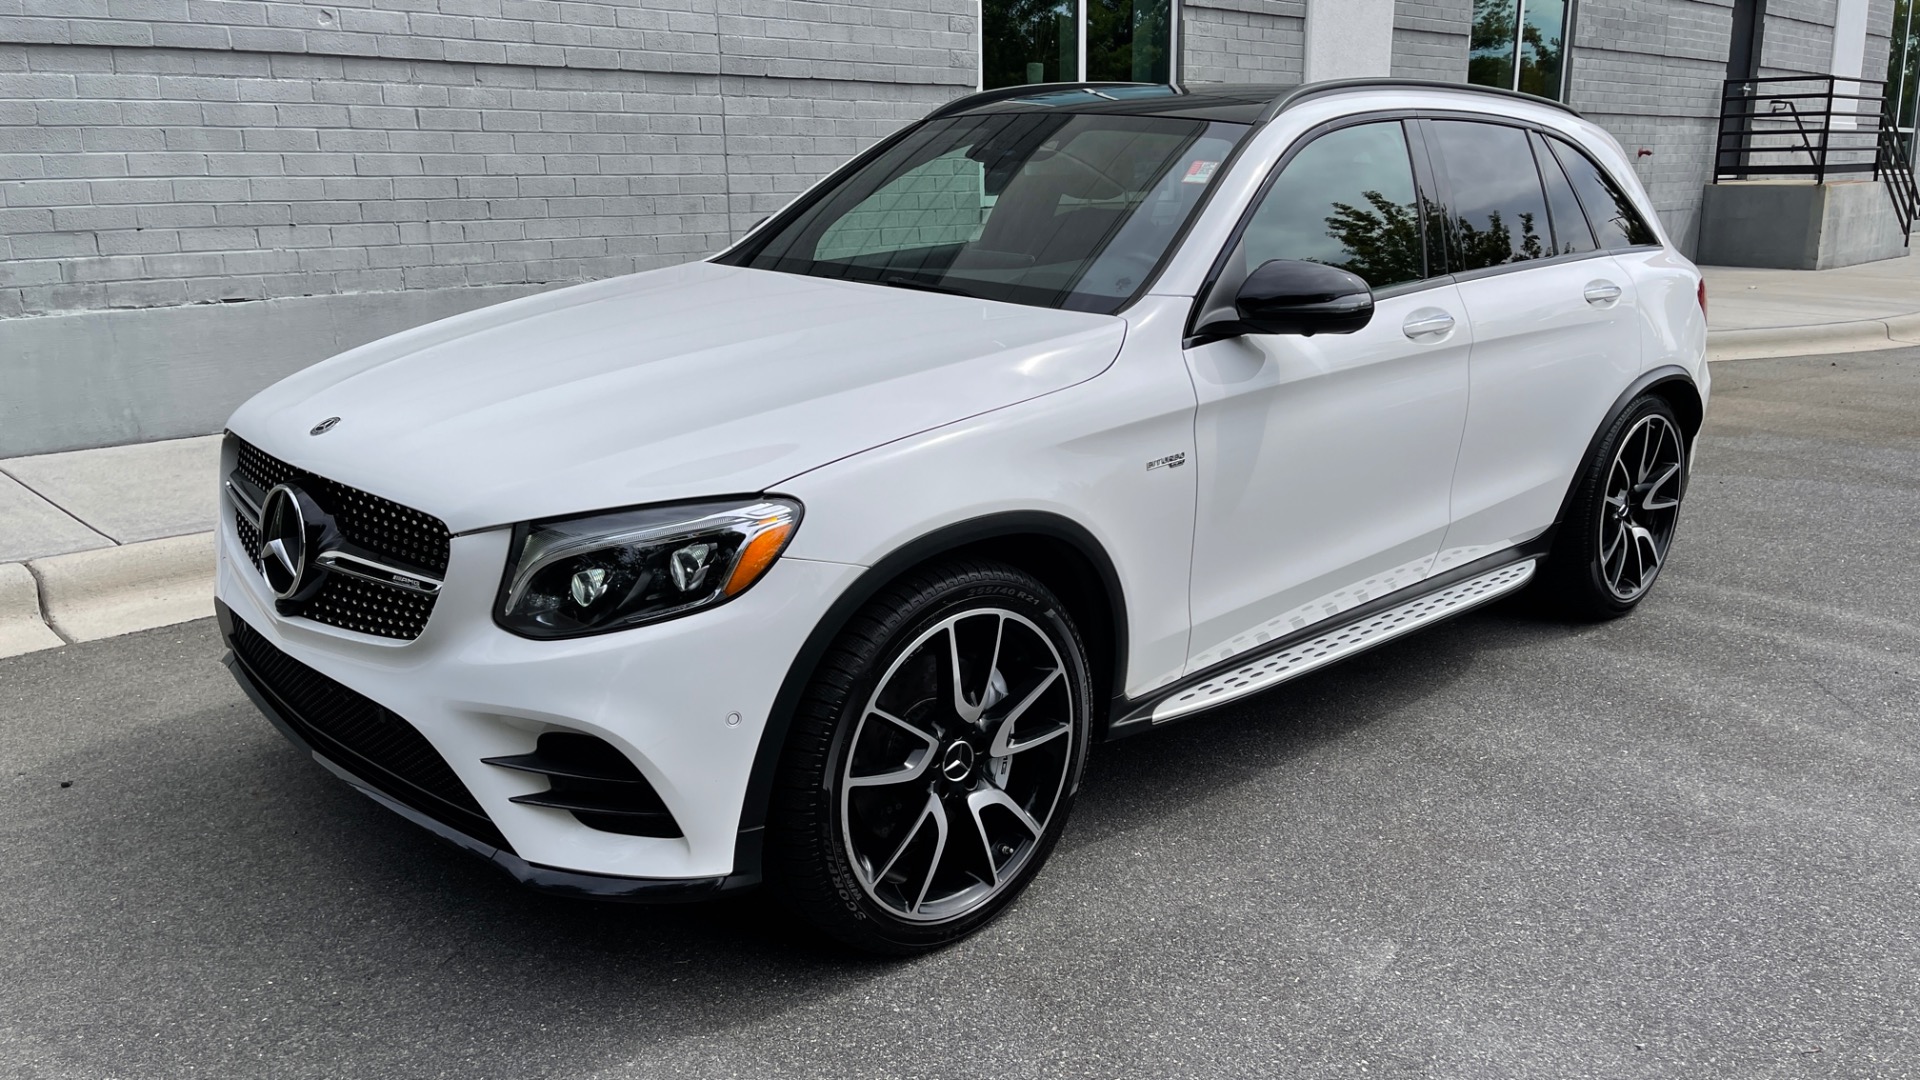 Used 2019 Mercedes-Benz GLC AMG GLC 43 / AMG BLACKOUT / 21IN WHEELS / AMG EXHAUST / EXTERIOR LIGHTING for sale $48,999 at Formula Imports in Charlotte NC 28227 2